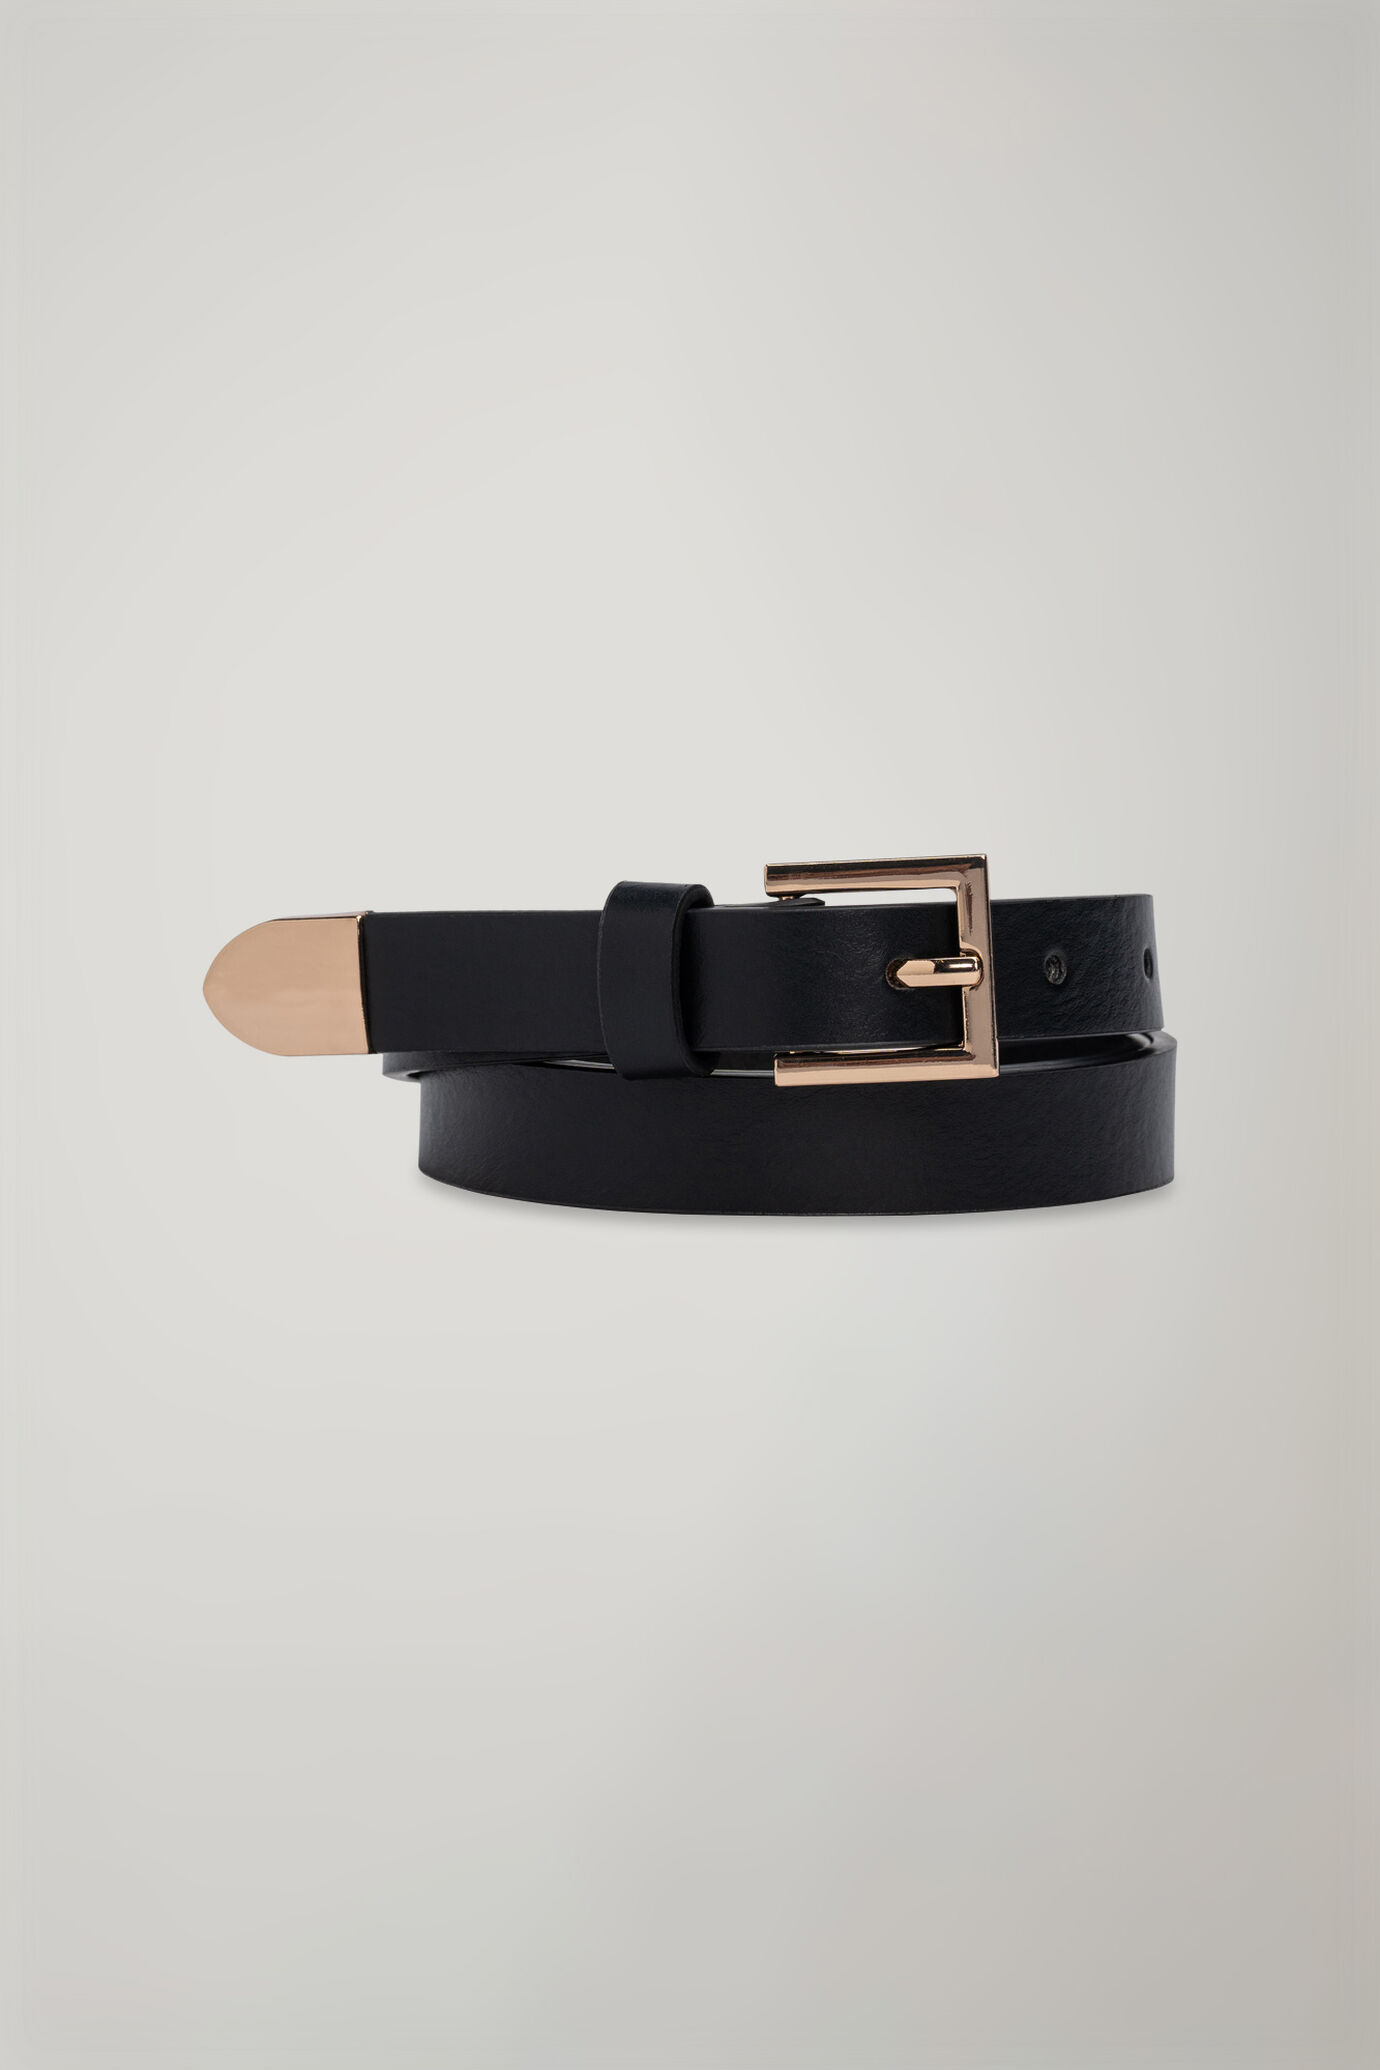 Women’s belt with aged brass finish